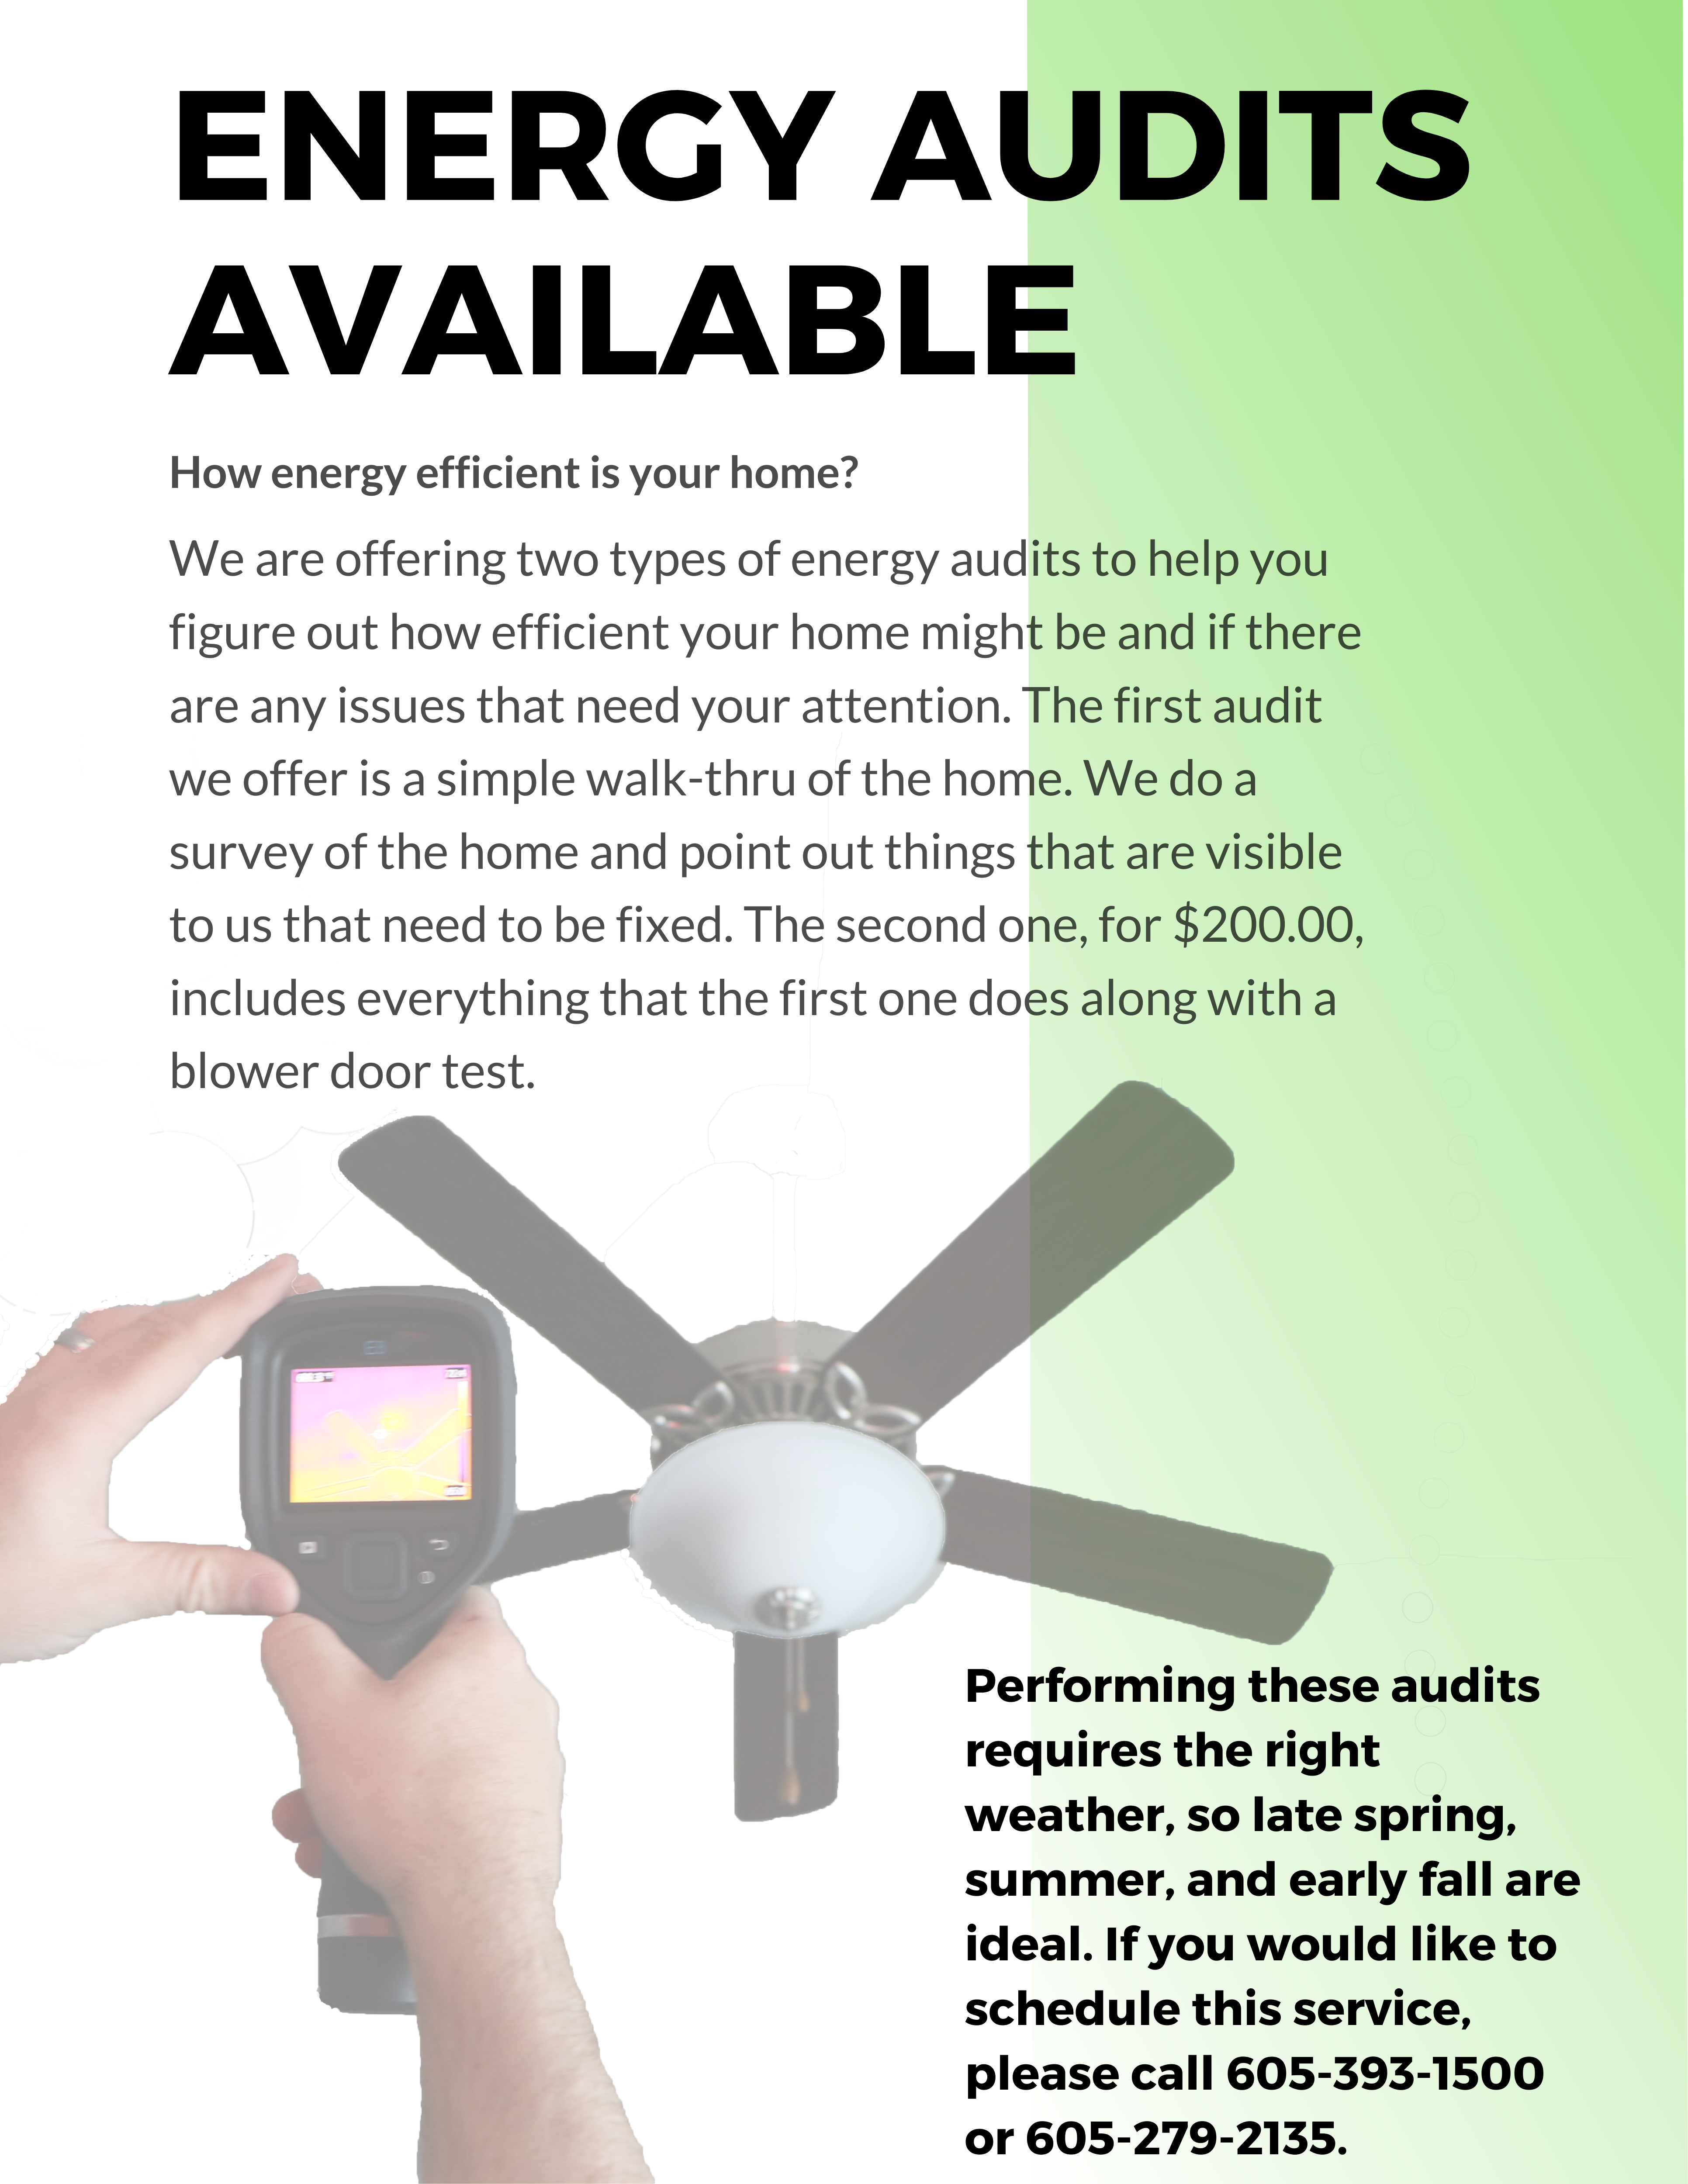 Information on Energy Audits